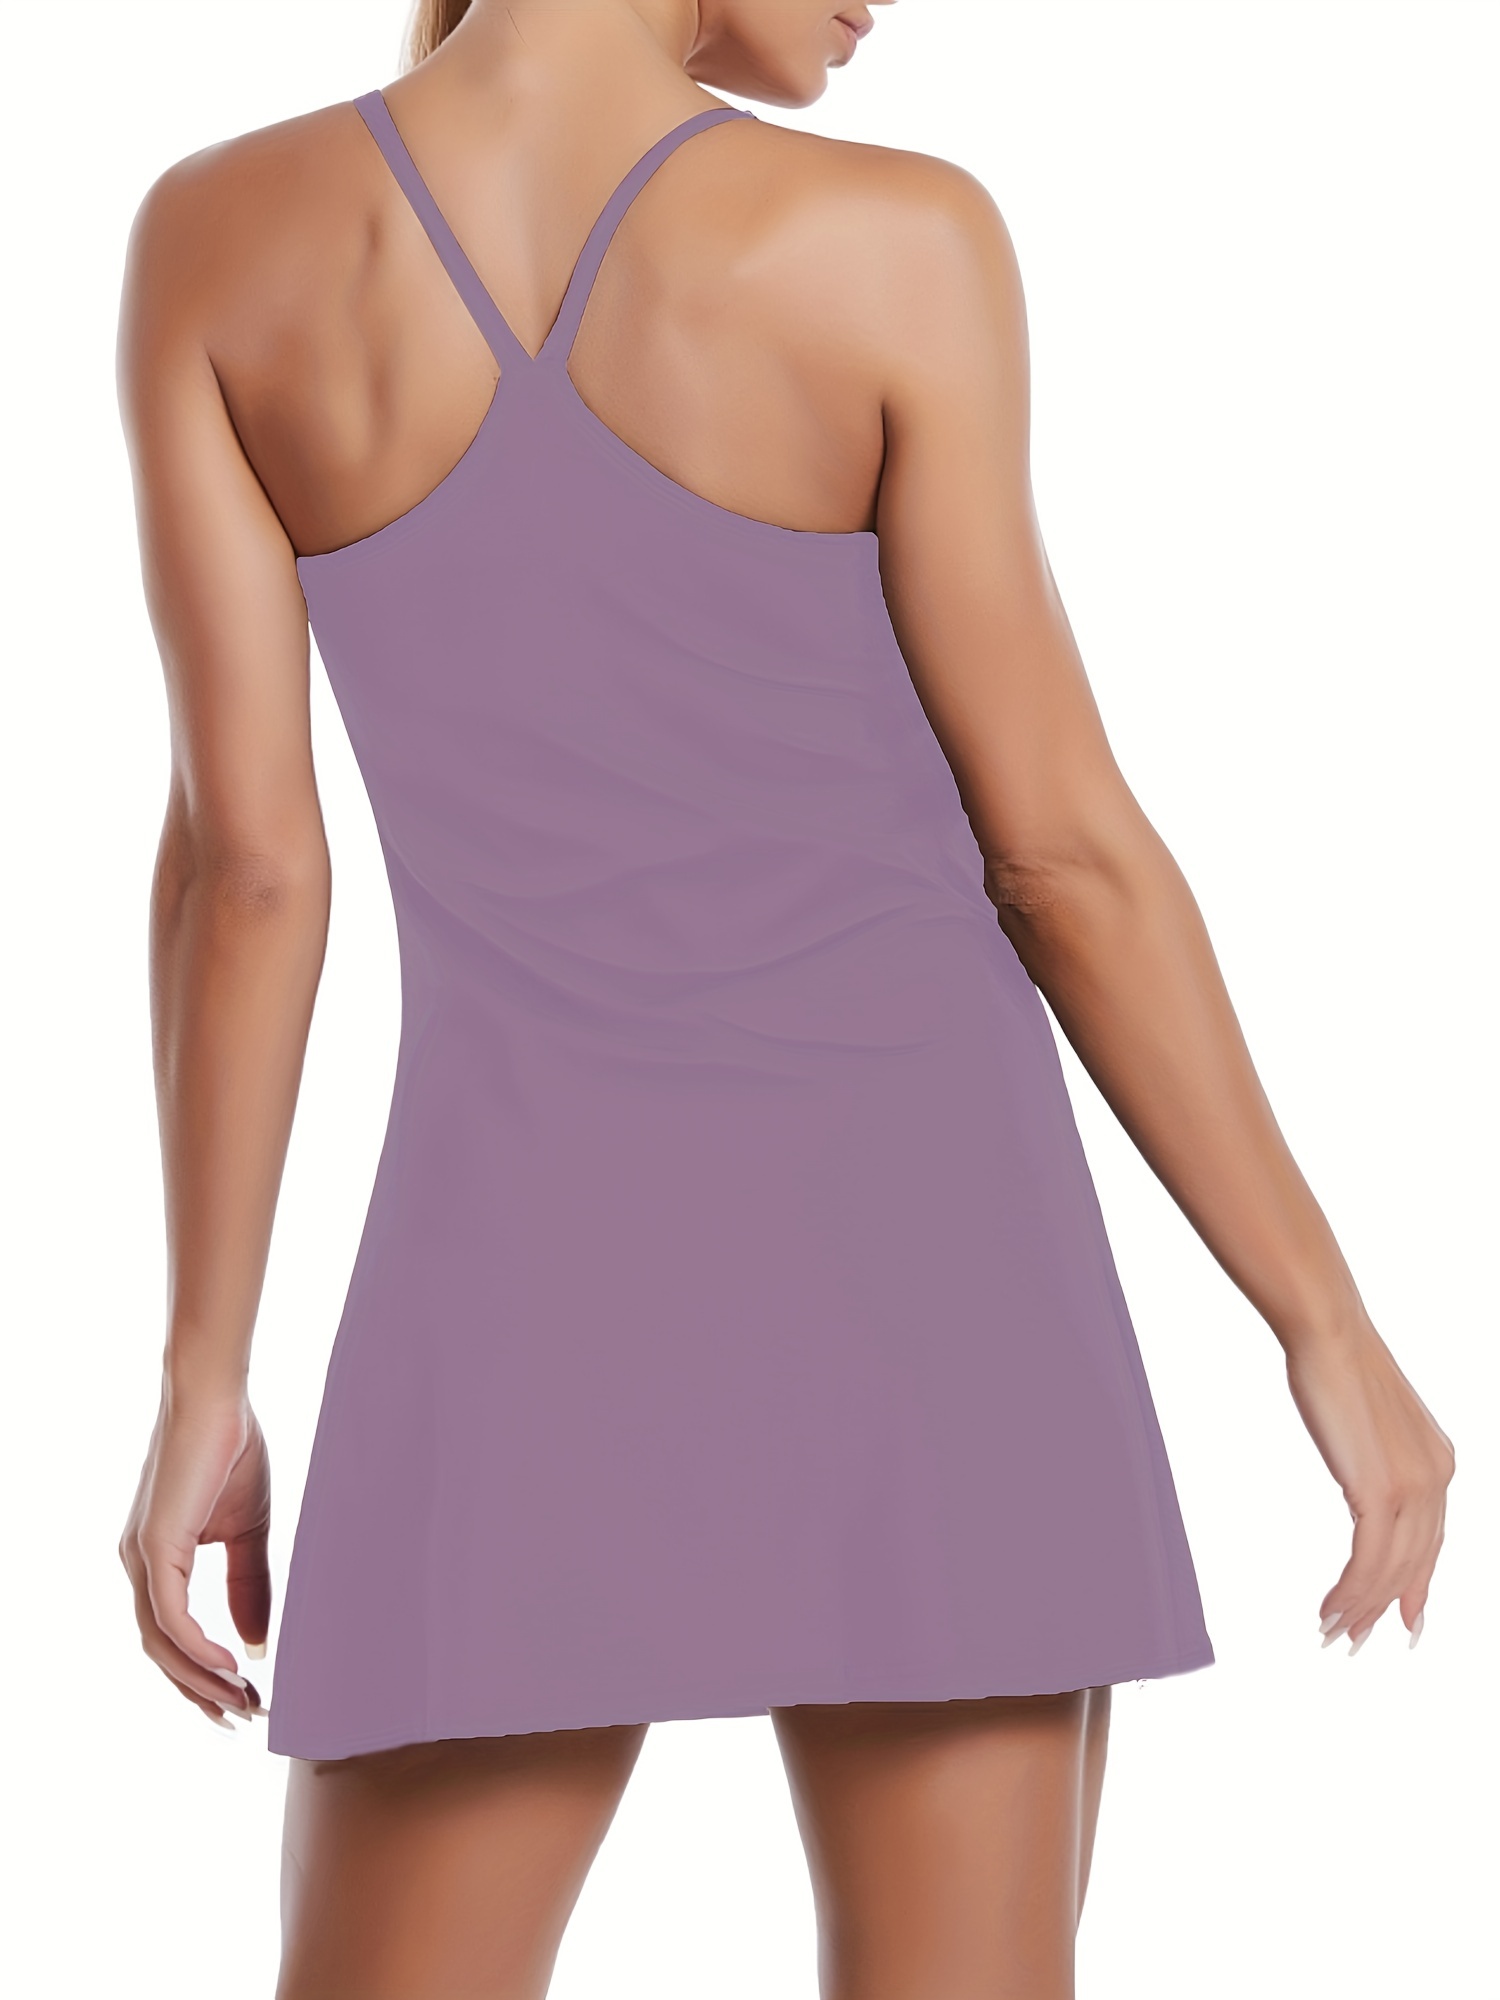  Athletic Dress with Built in Shorts & Bra Adjustable